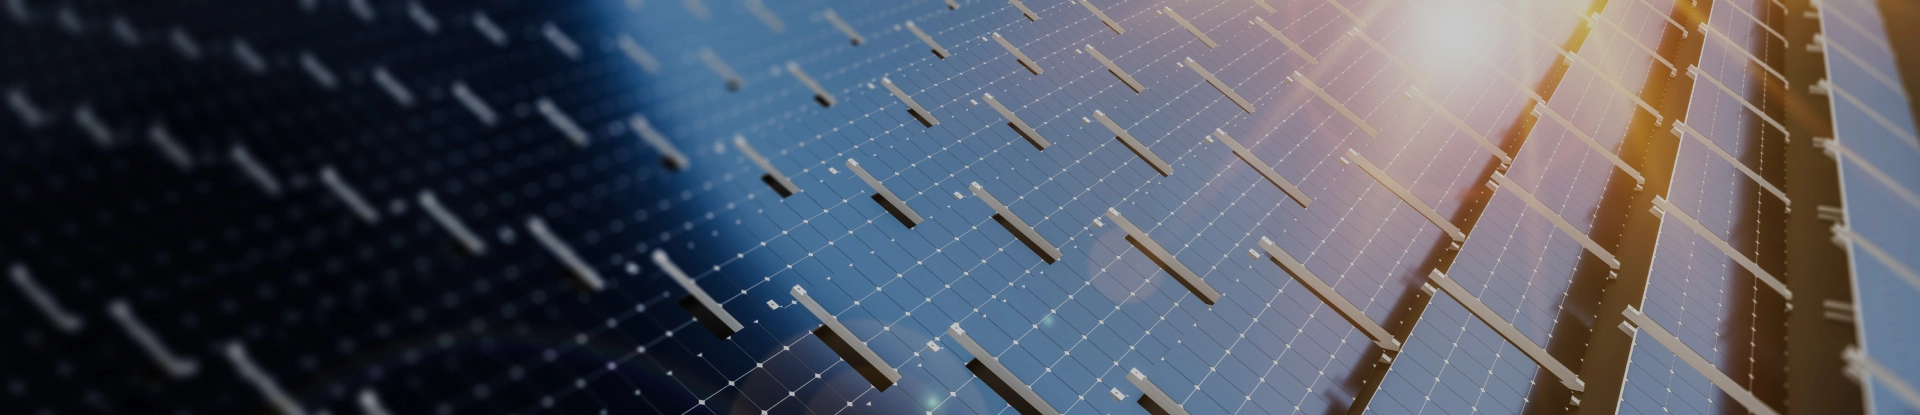 Photovoltaic panels for energy from renewable sources